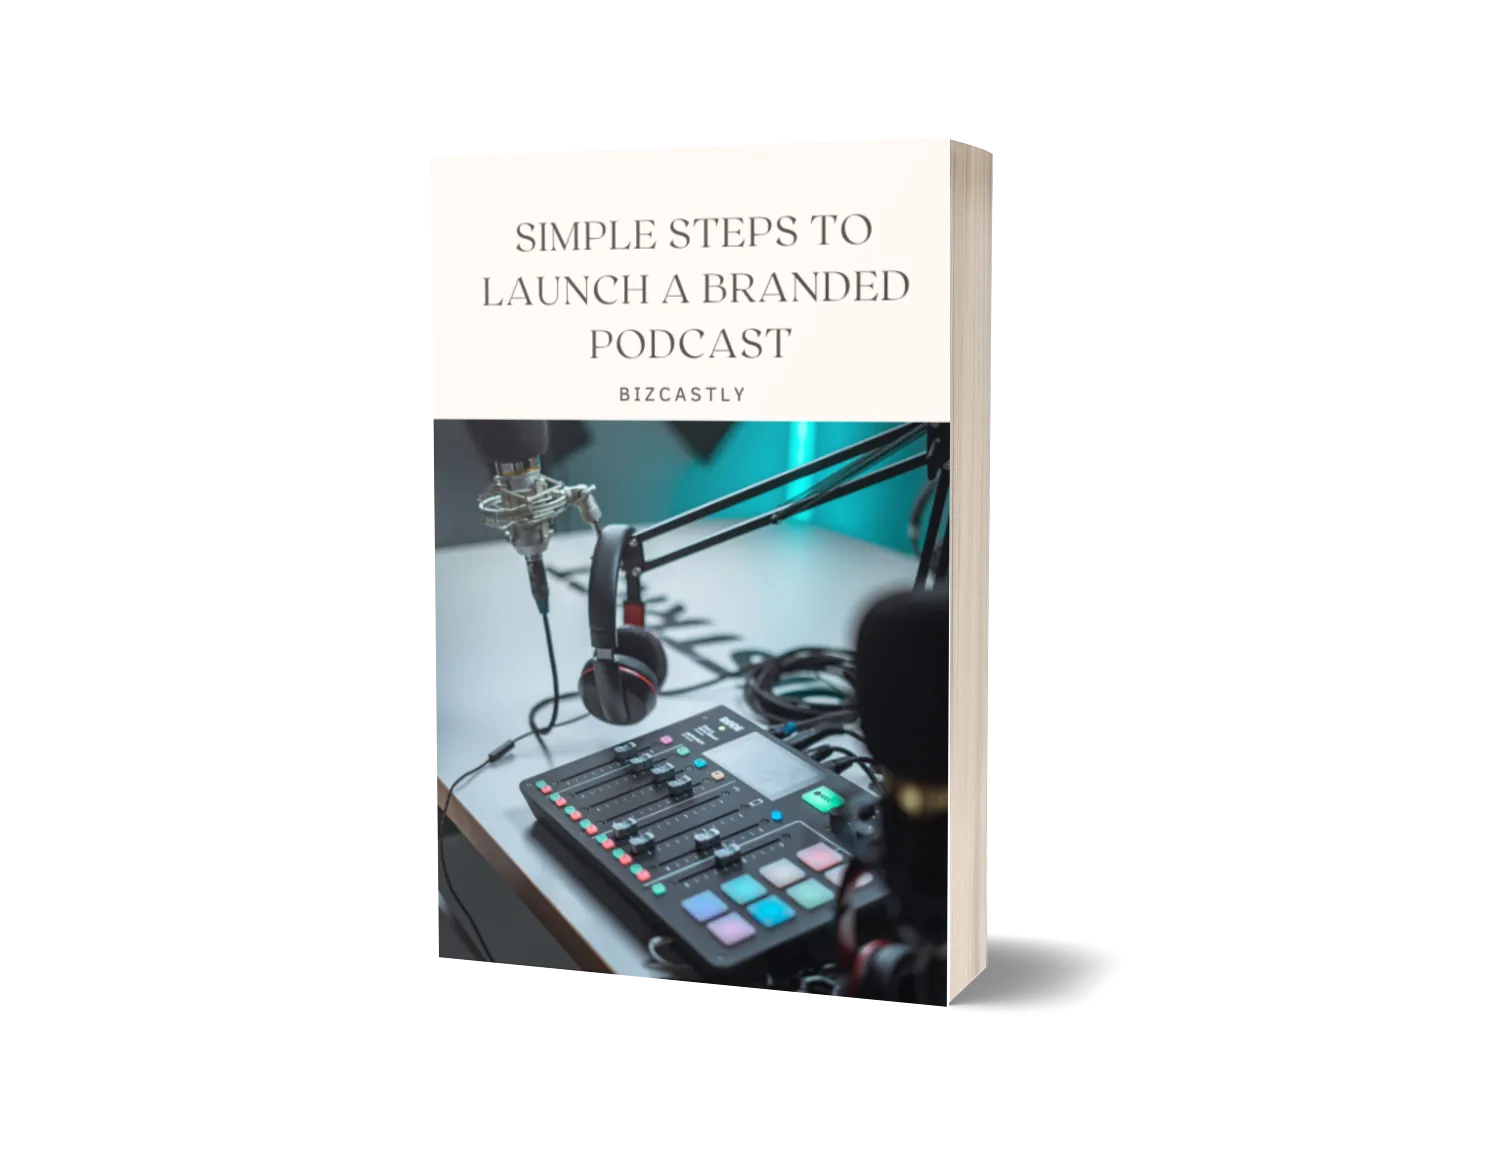 Simple Steps to Launch a Branded Podcast